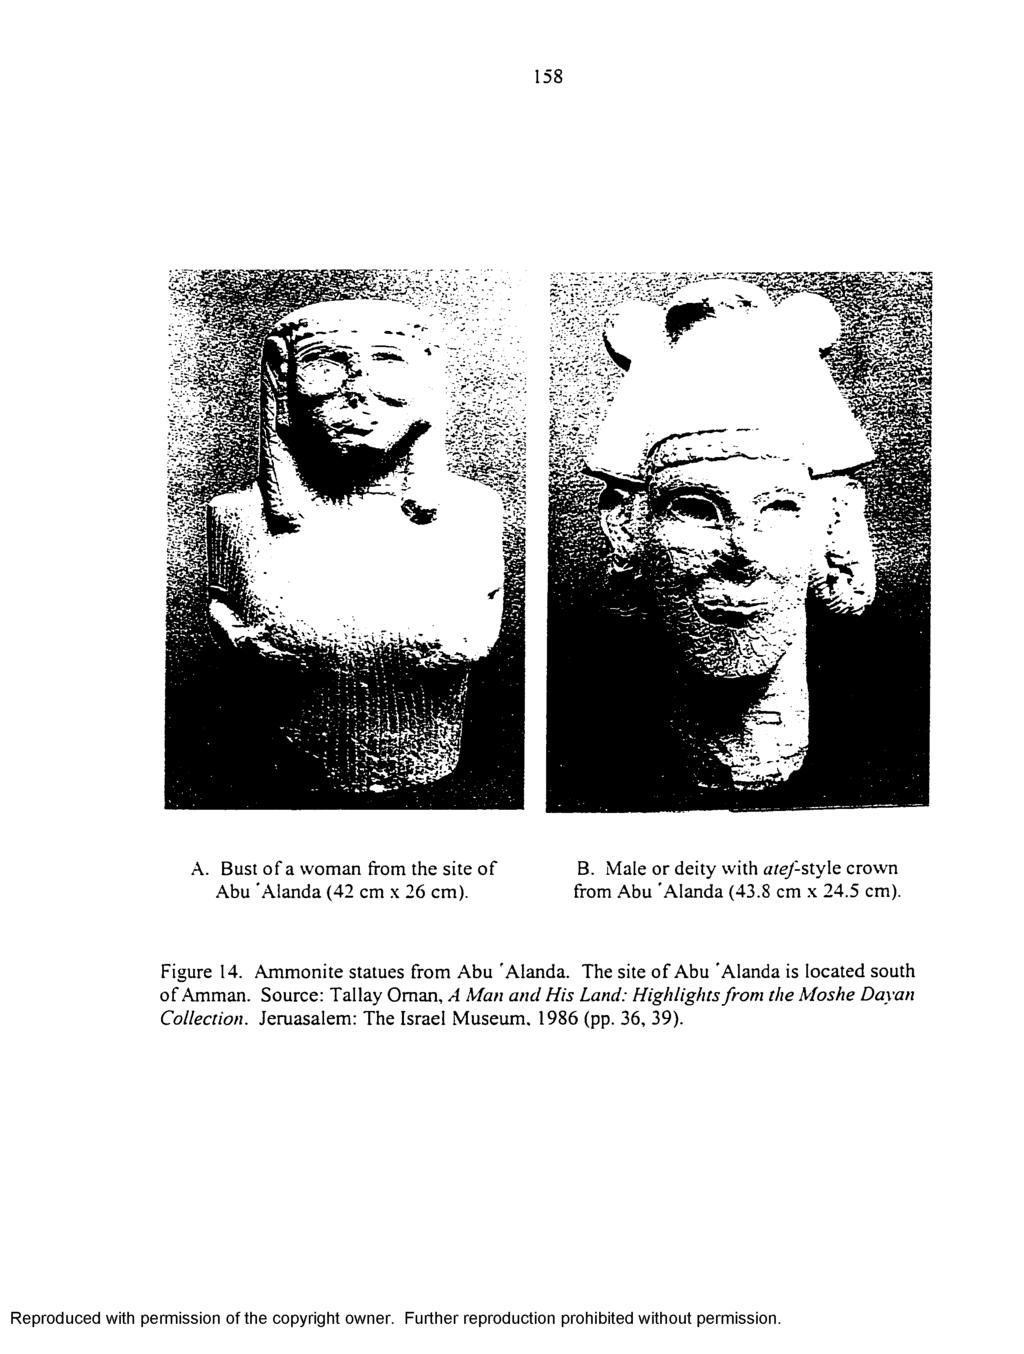 158 A. Bust of a woman from the site of B. Male or deity with a/e/-style crown Abu 'Alanda (42 cm x 26 cm). from Abu Alanda (43.8 cm x 24.5 cm). Figure 14.